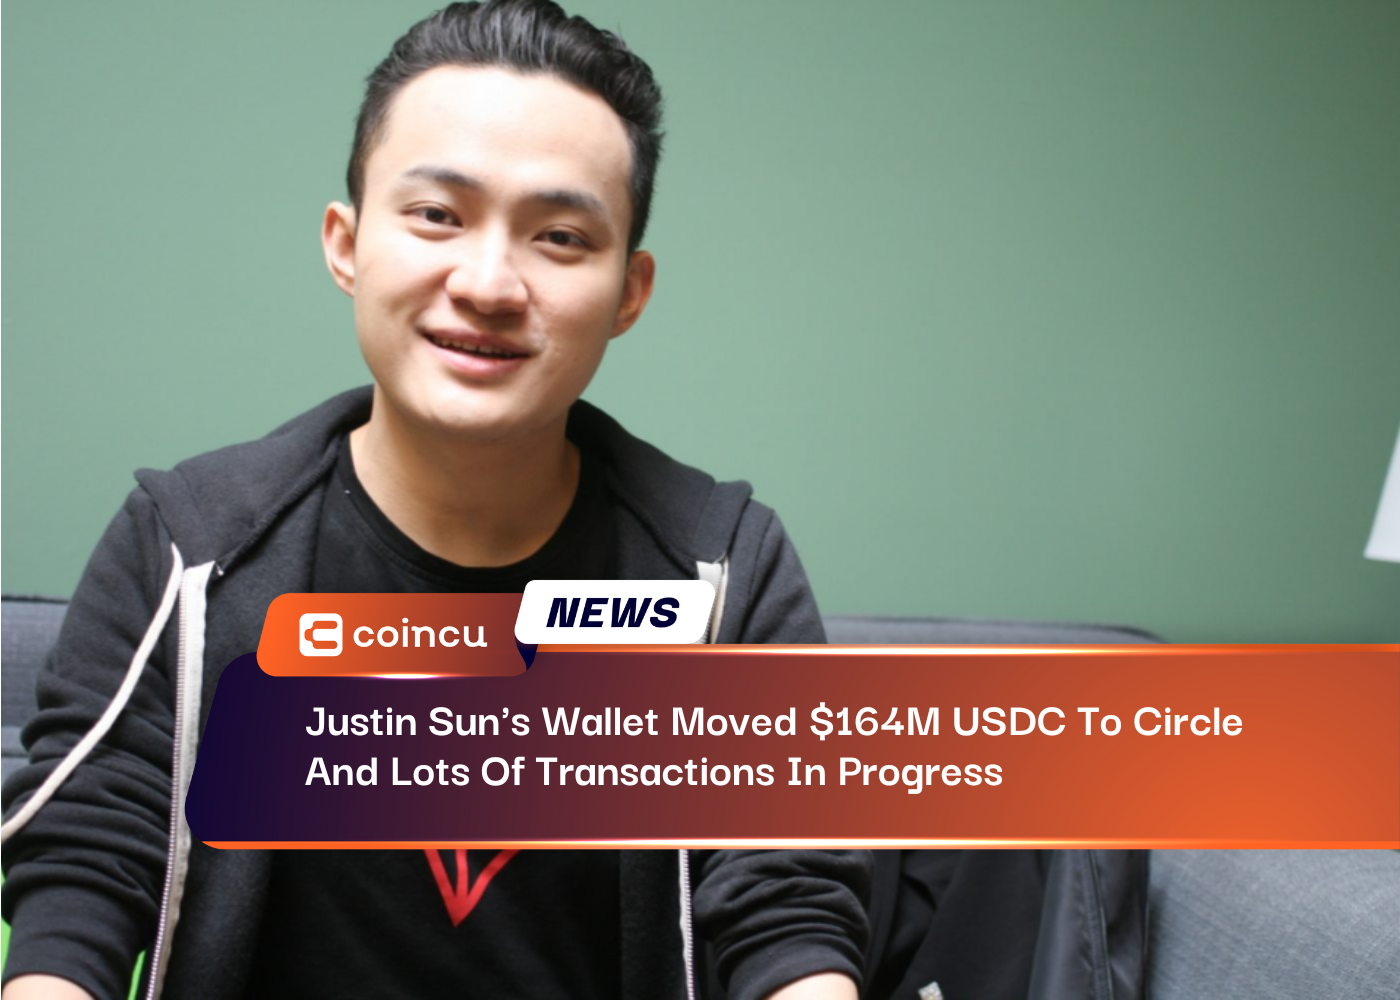 Justin Sun's Wallet Moved $164M USDC To Circle And Lots Of Transactions In Progress